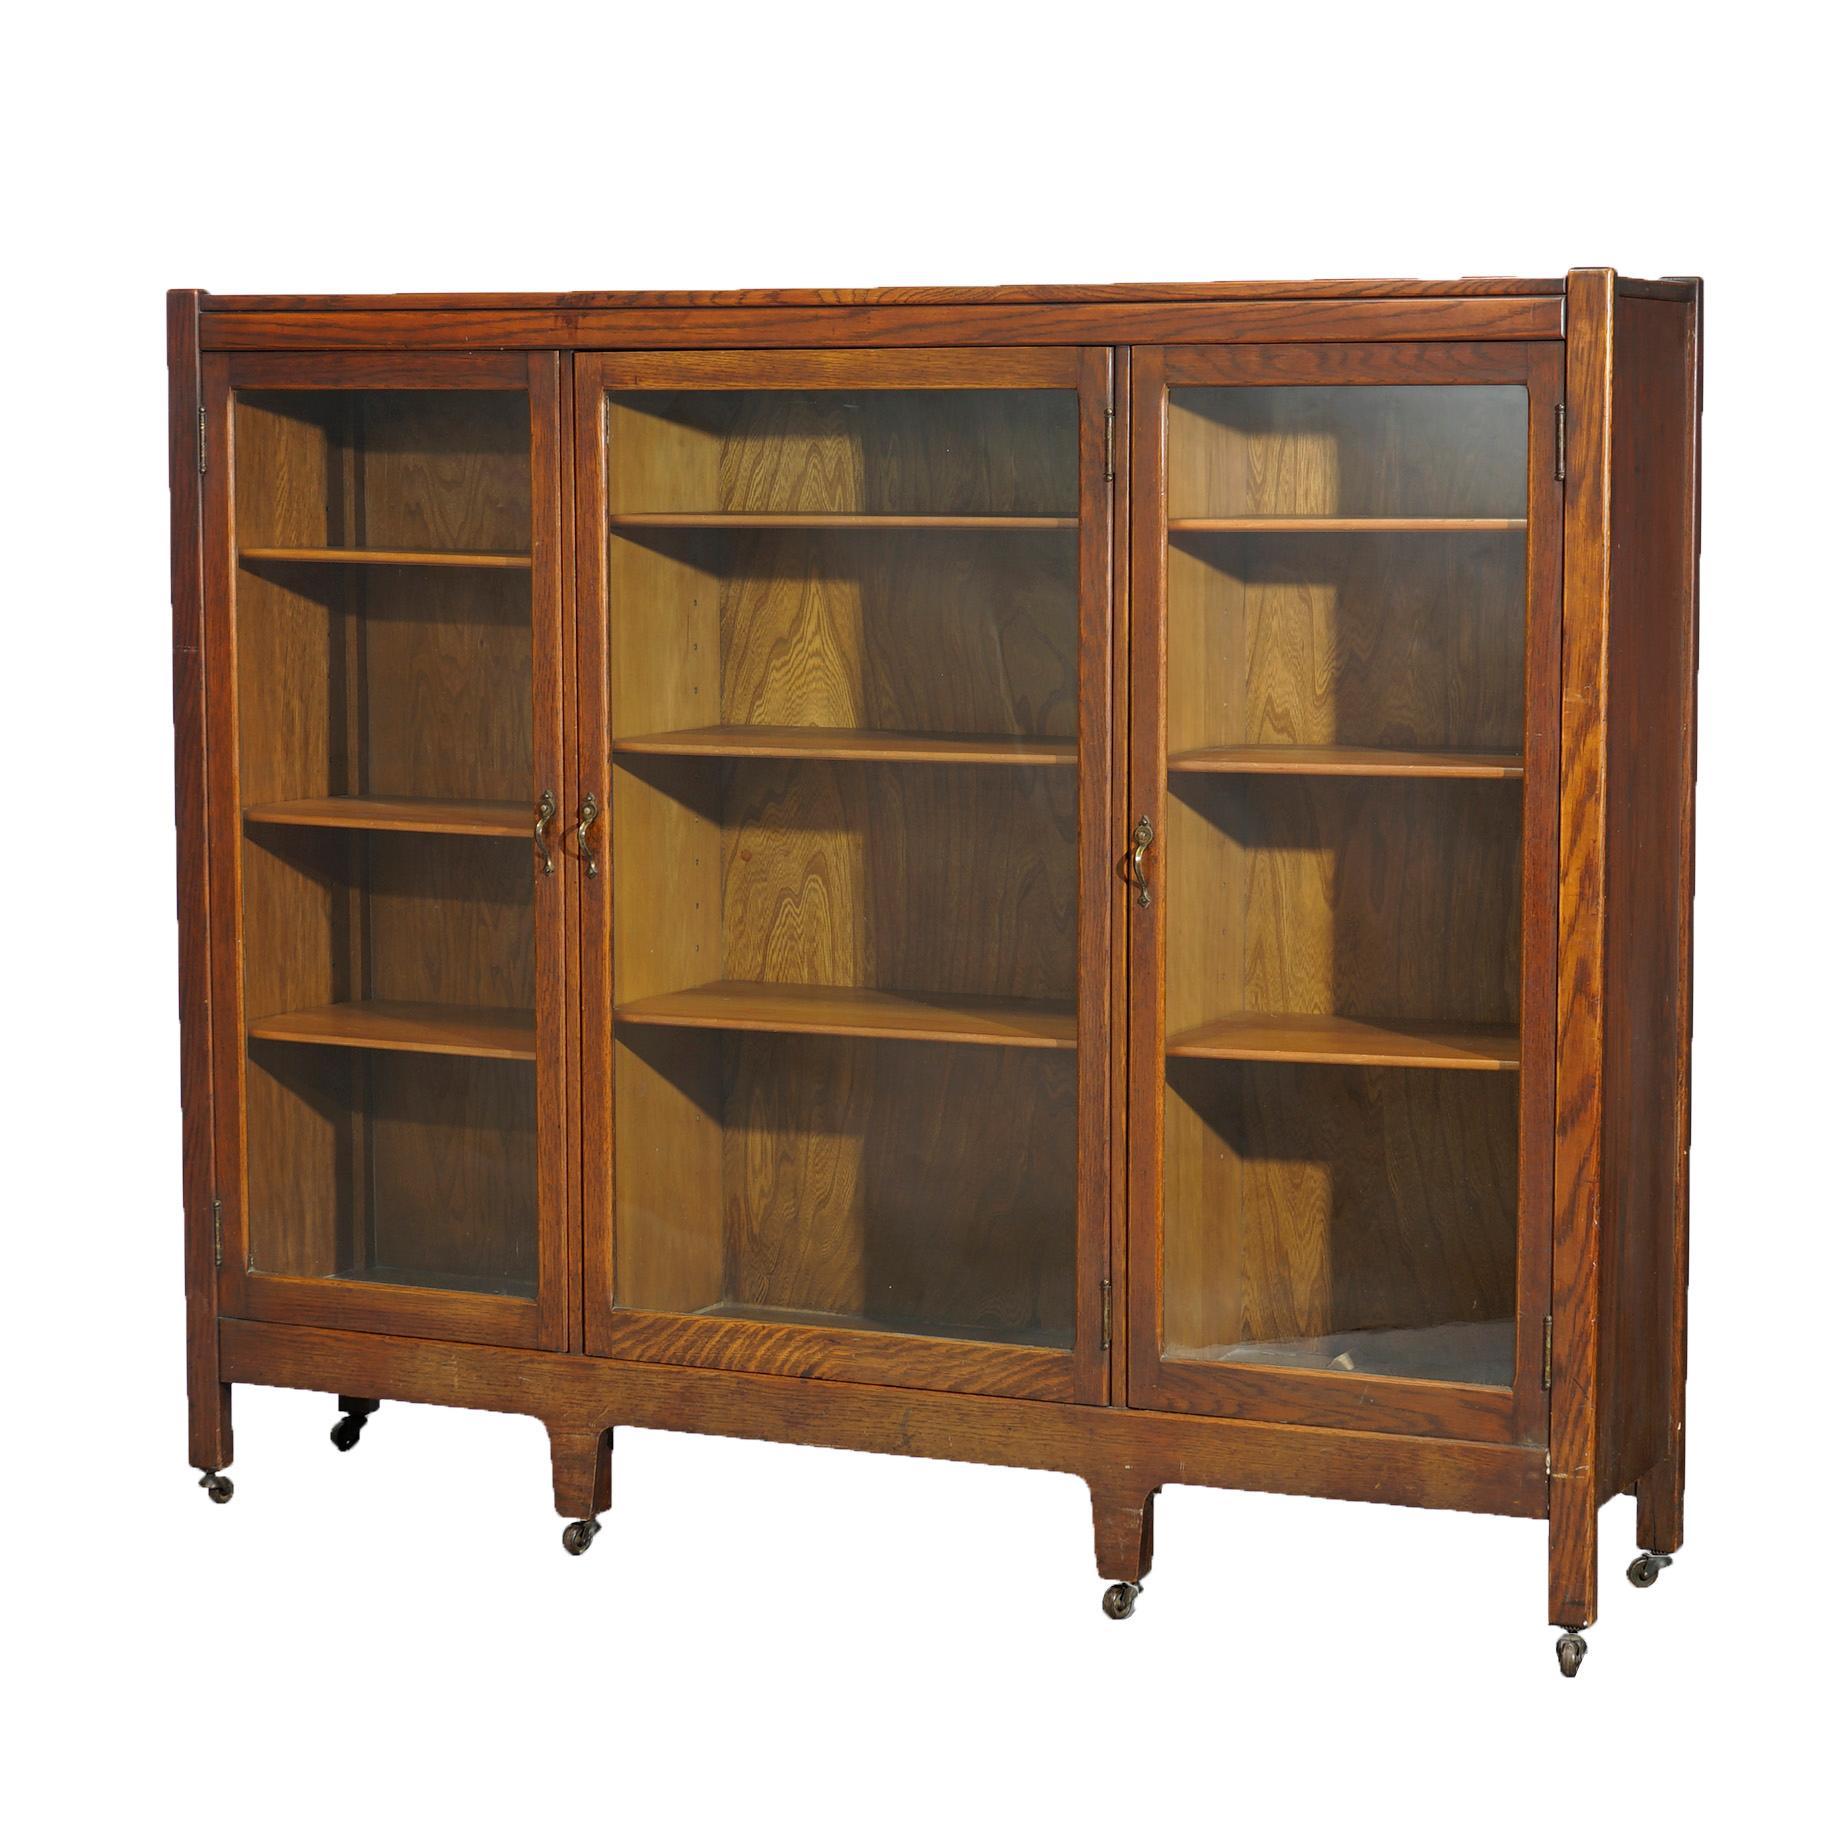 An antique Arts and Crafts enclosed bookcase offers quarter sawn oak construction with three glass doors opening to divided and adjustable shelved interiors, raised on square and straight legs with casters, c1910

Measures - 49.75'' H x 59.25'' W